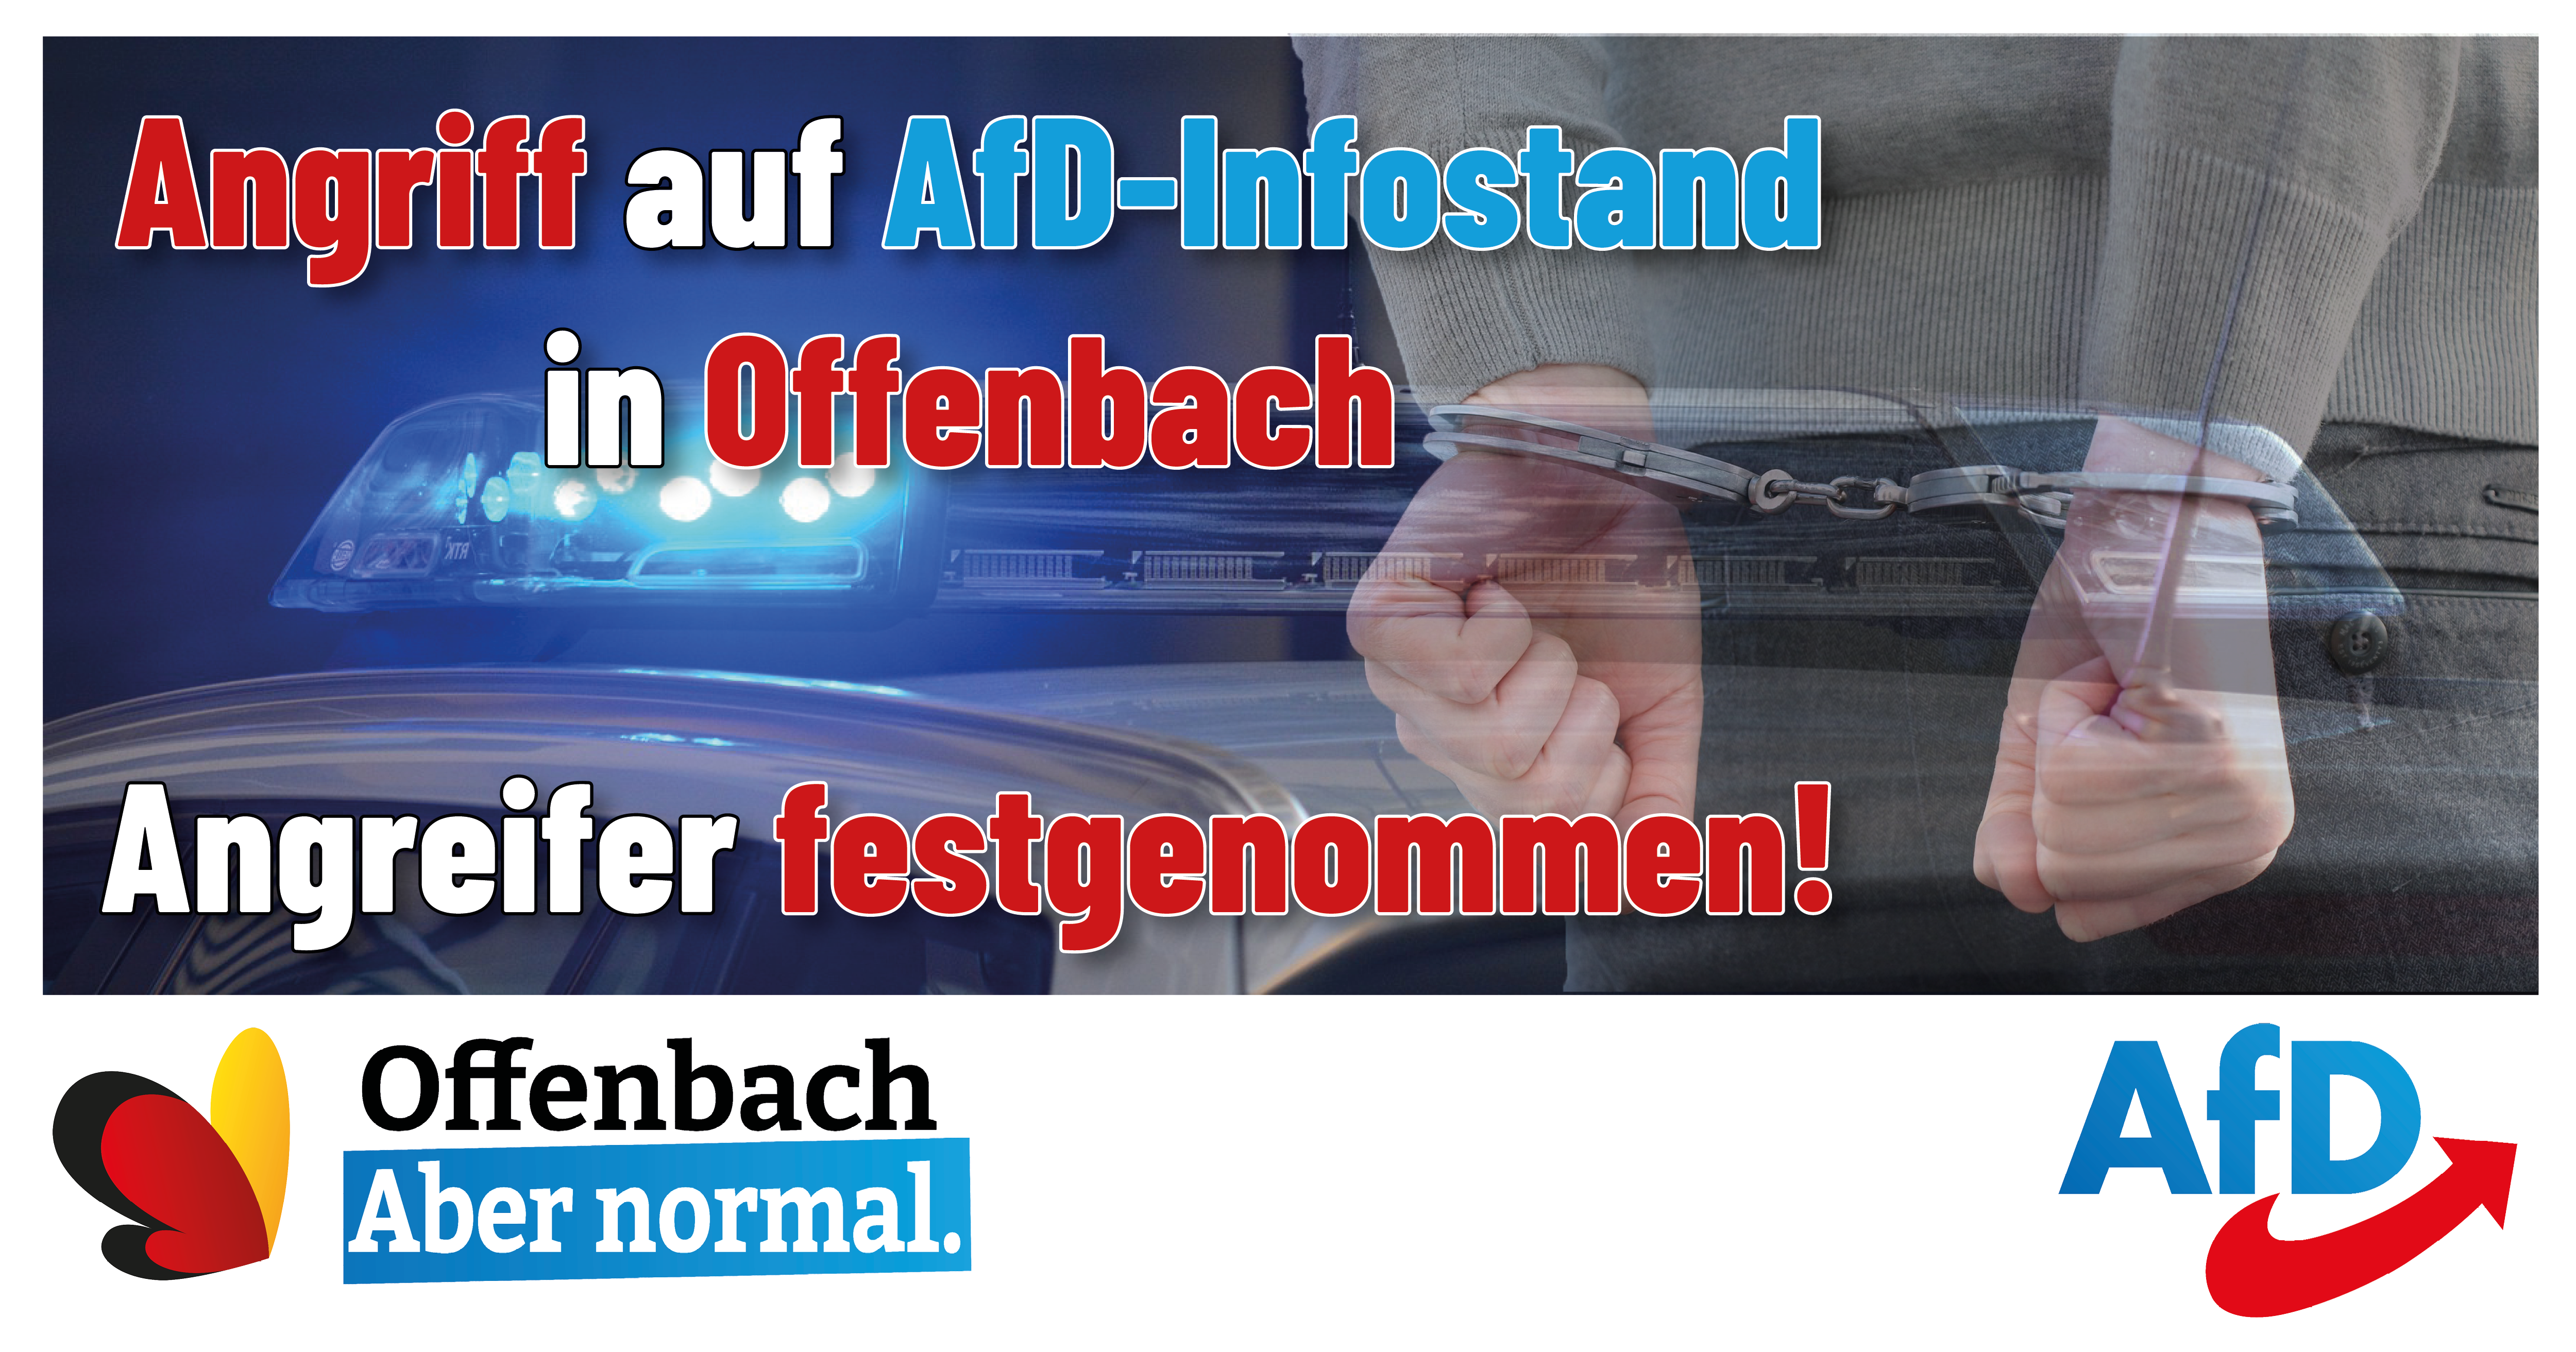 You are currently viewing Angriff auf AfD-Infostand in der Offenbacher Innenstadt